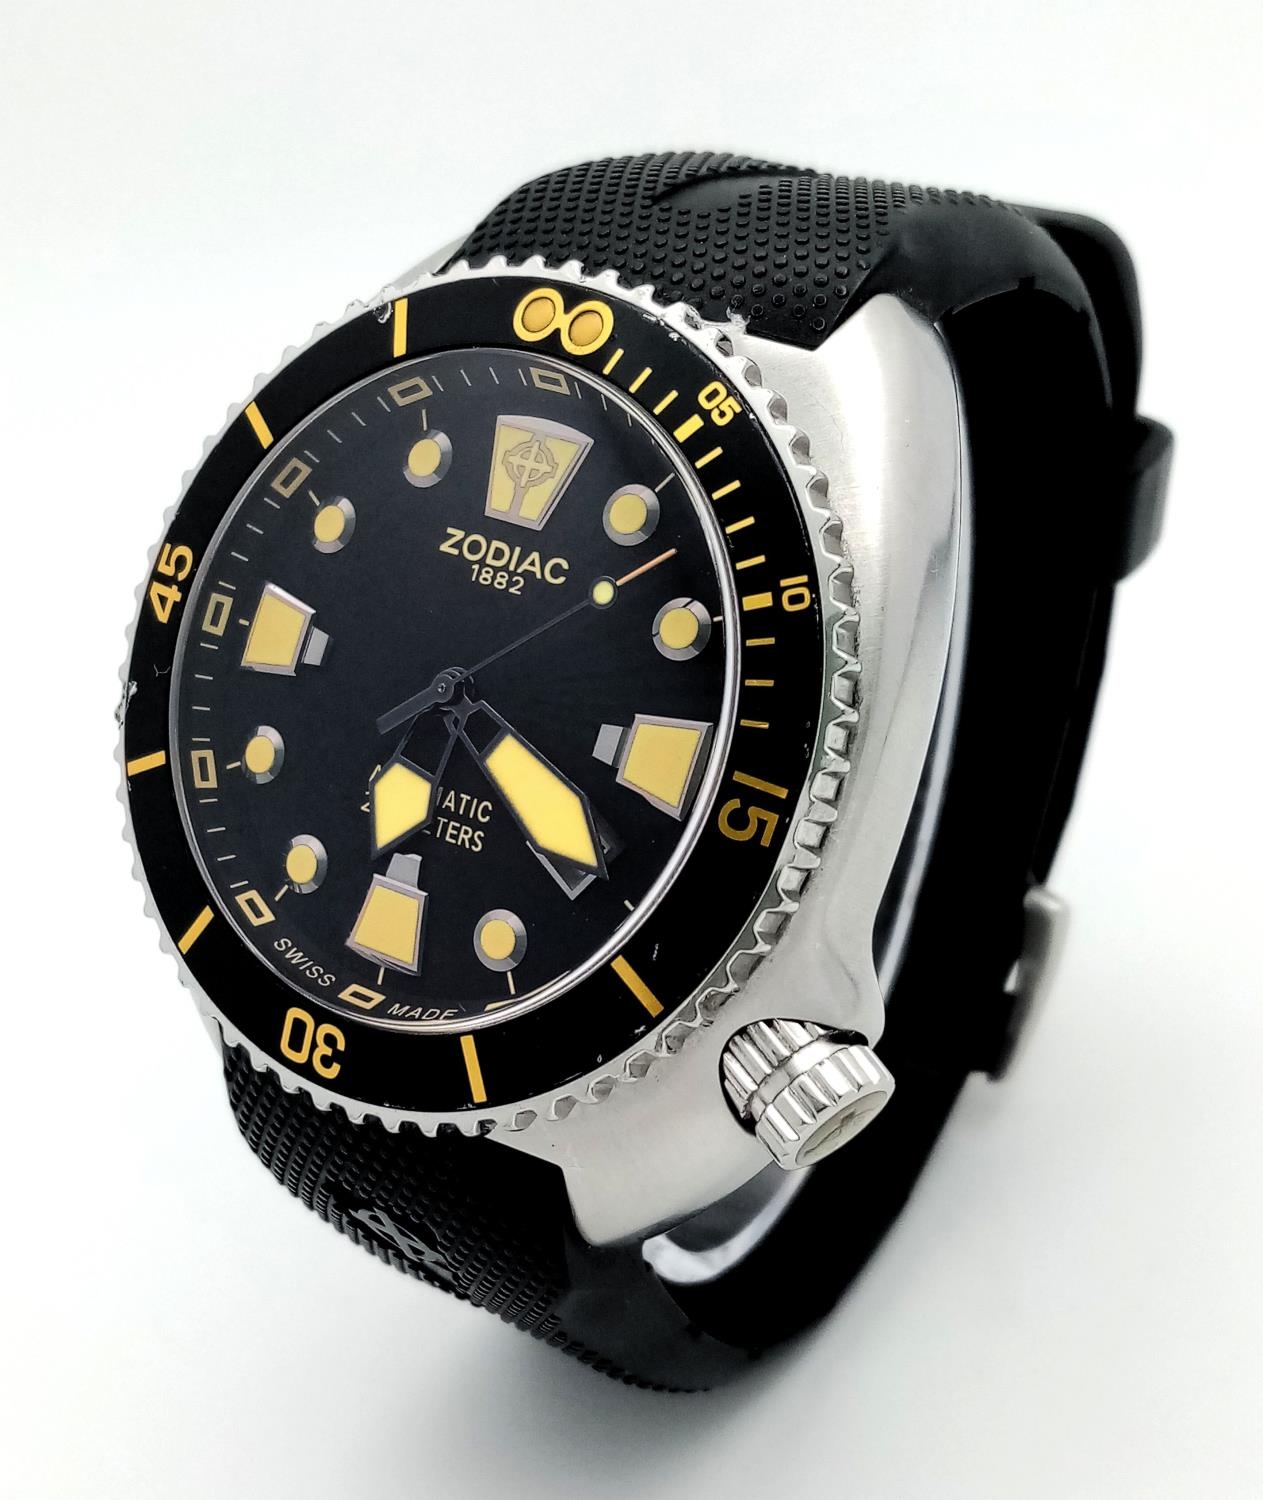 A Zodiac Automatic Gents Divers Watch. Water resistant to 200m. Black rubber strap. Stainless